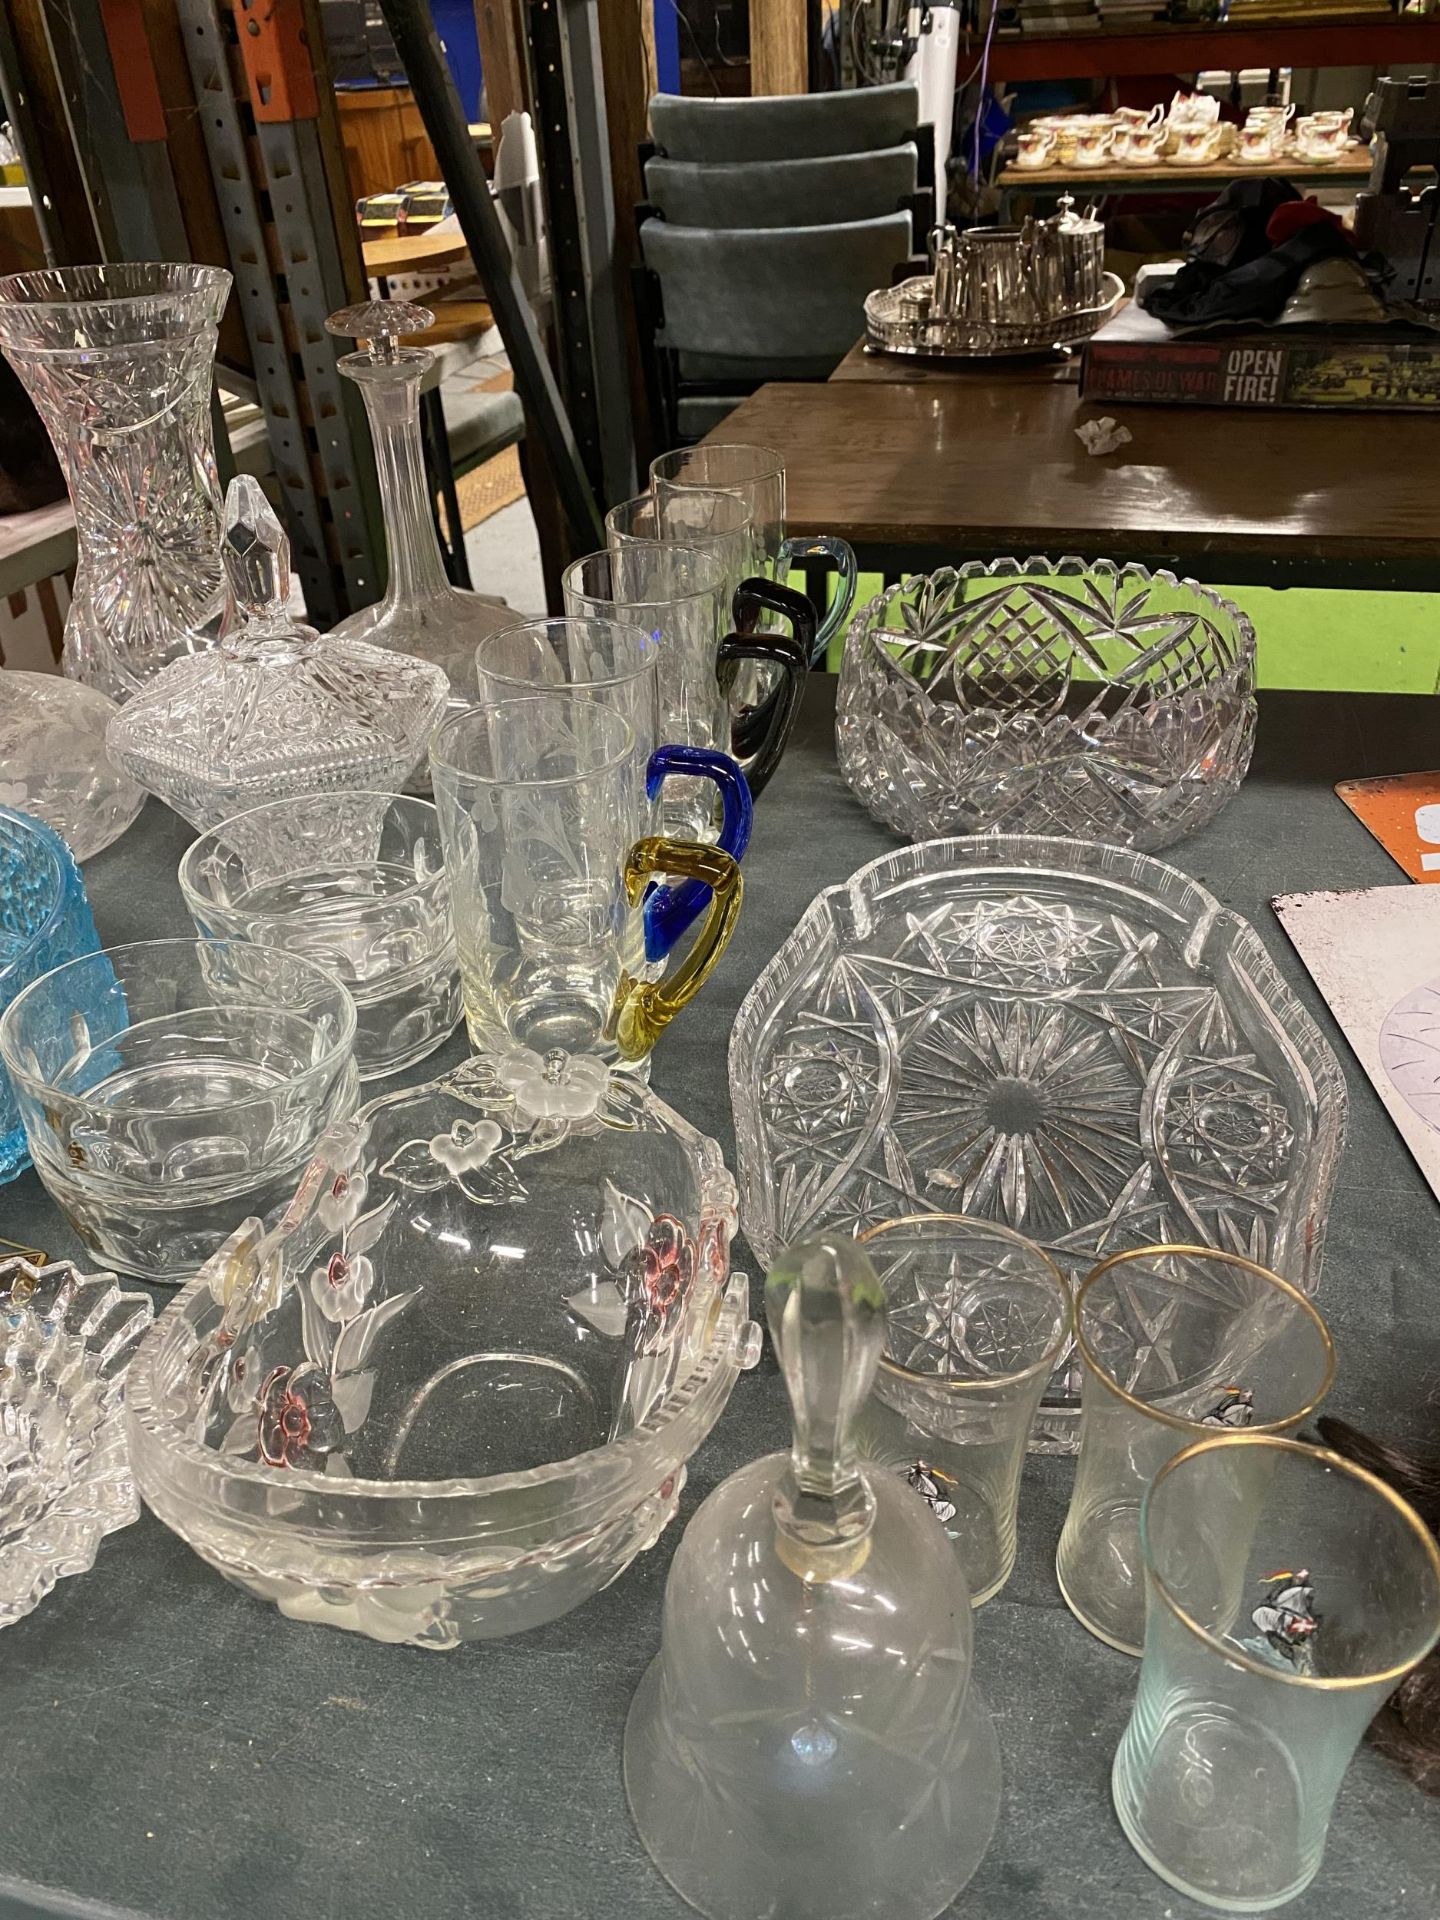 A LARGE QUANTITY OF GLASSWARE TO INCLUDE VASES, DECANTERS, BOWLS, GLASSES, ETC - Image 3 of 3